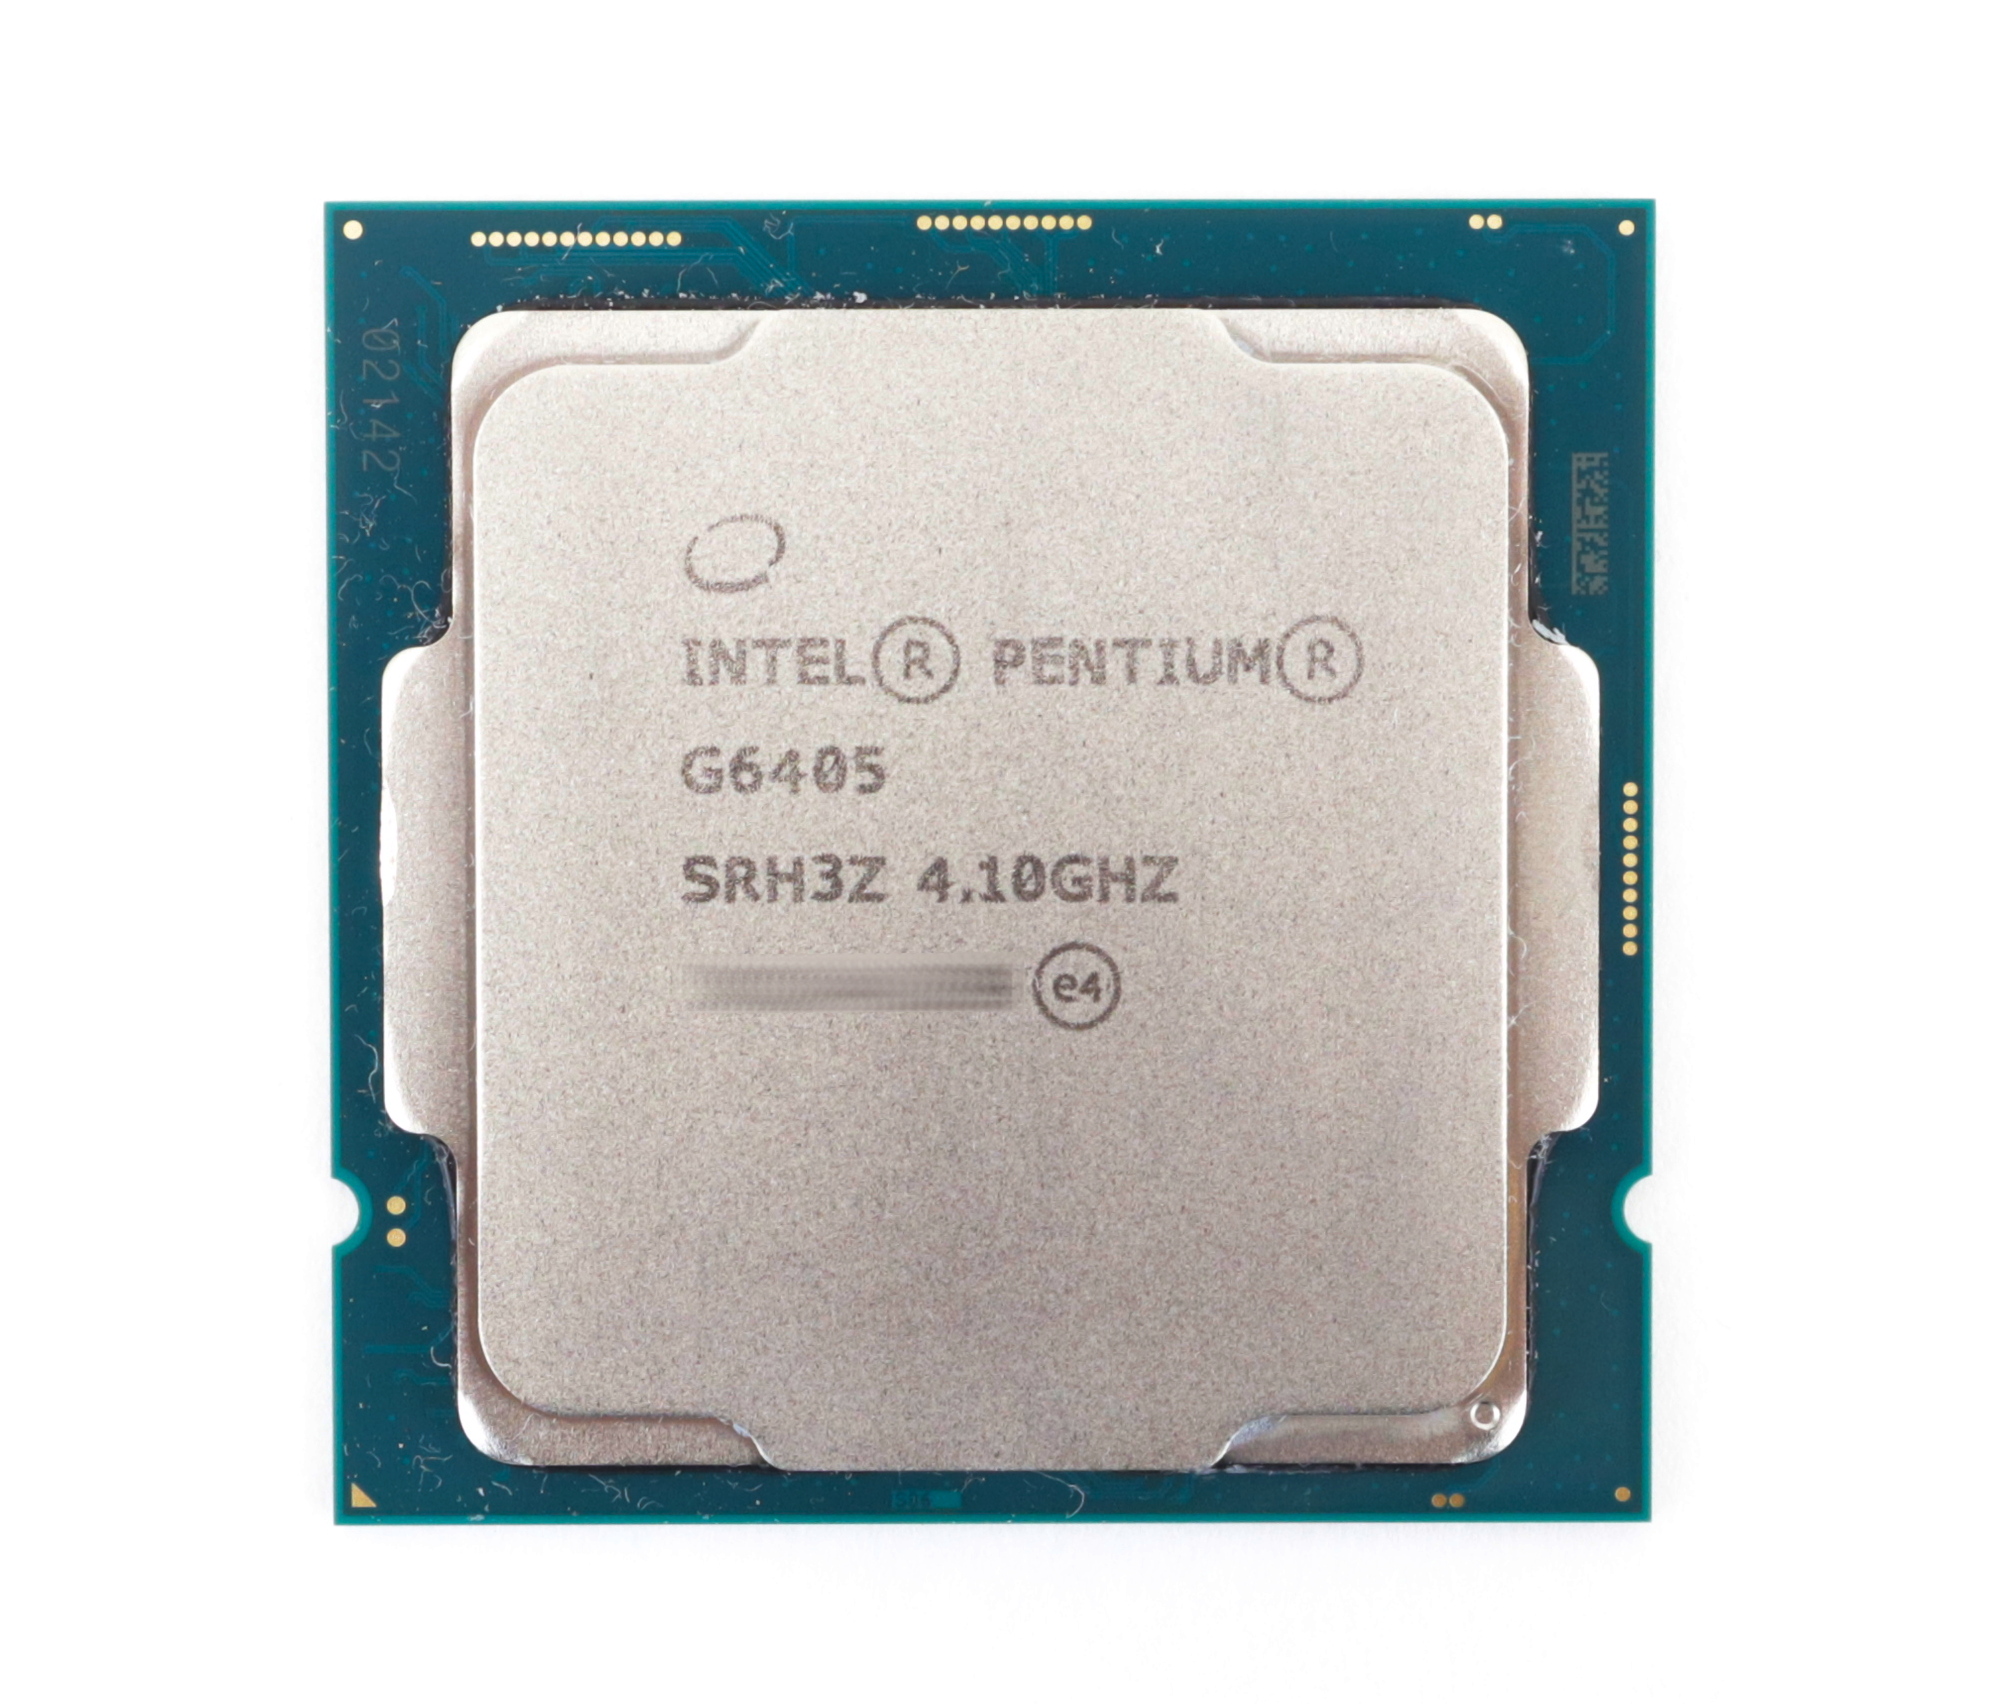 Intel Core i7-11700K 3.6GHz 16M Cache 8C 16T Sockets FCLGA1200 SRKNL  [SRKNL] - $273.00 : Professional Multi Monitor Workstations, Graphics Card  Experts